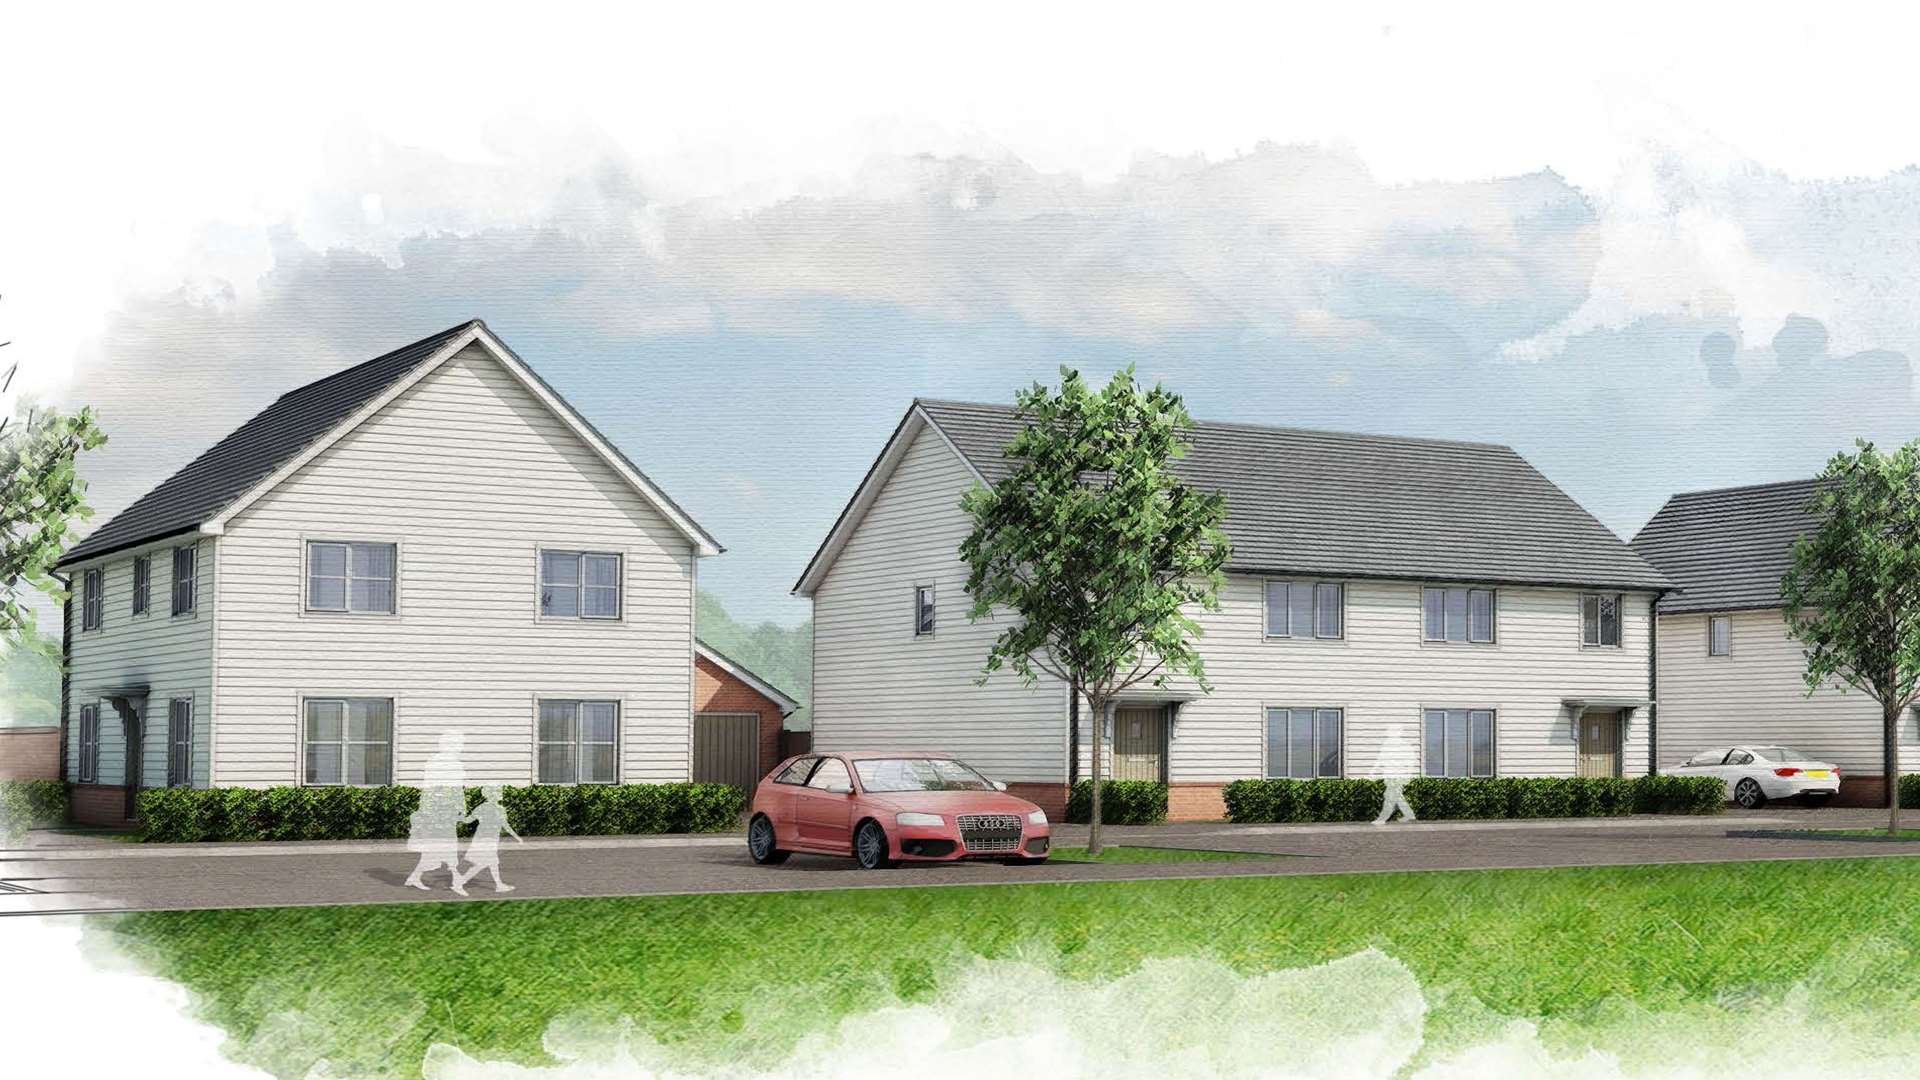 An illustration of some of the homes proposed for phase one of the development